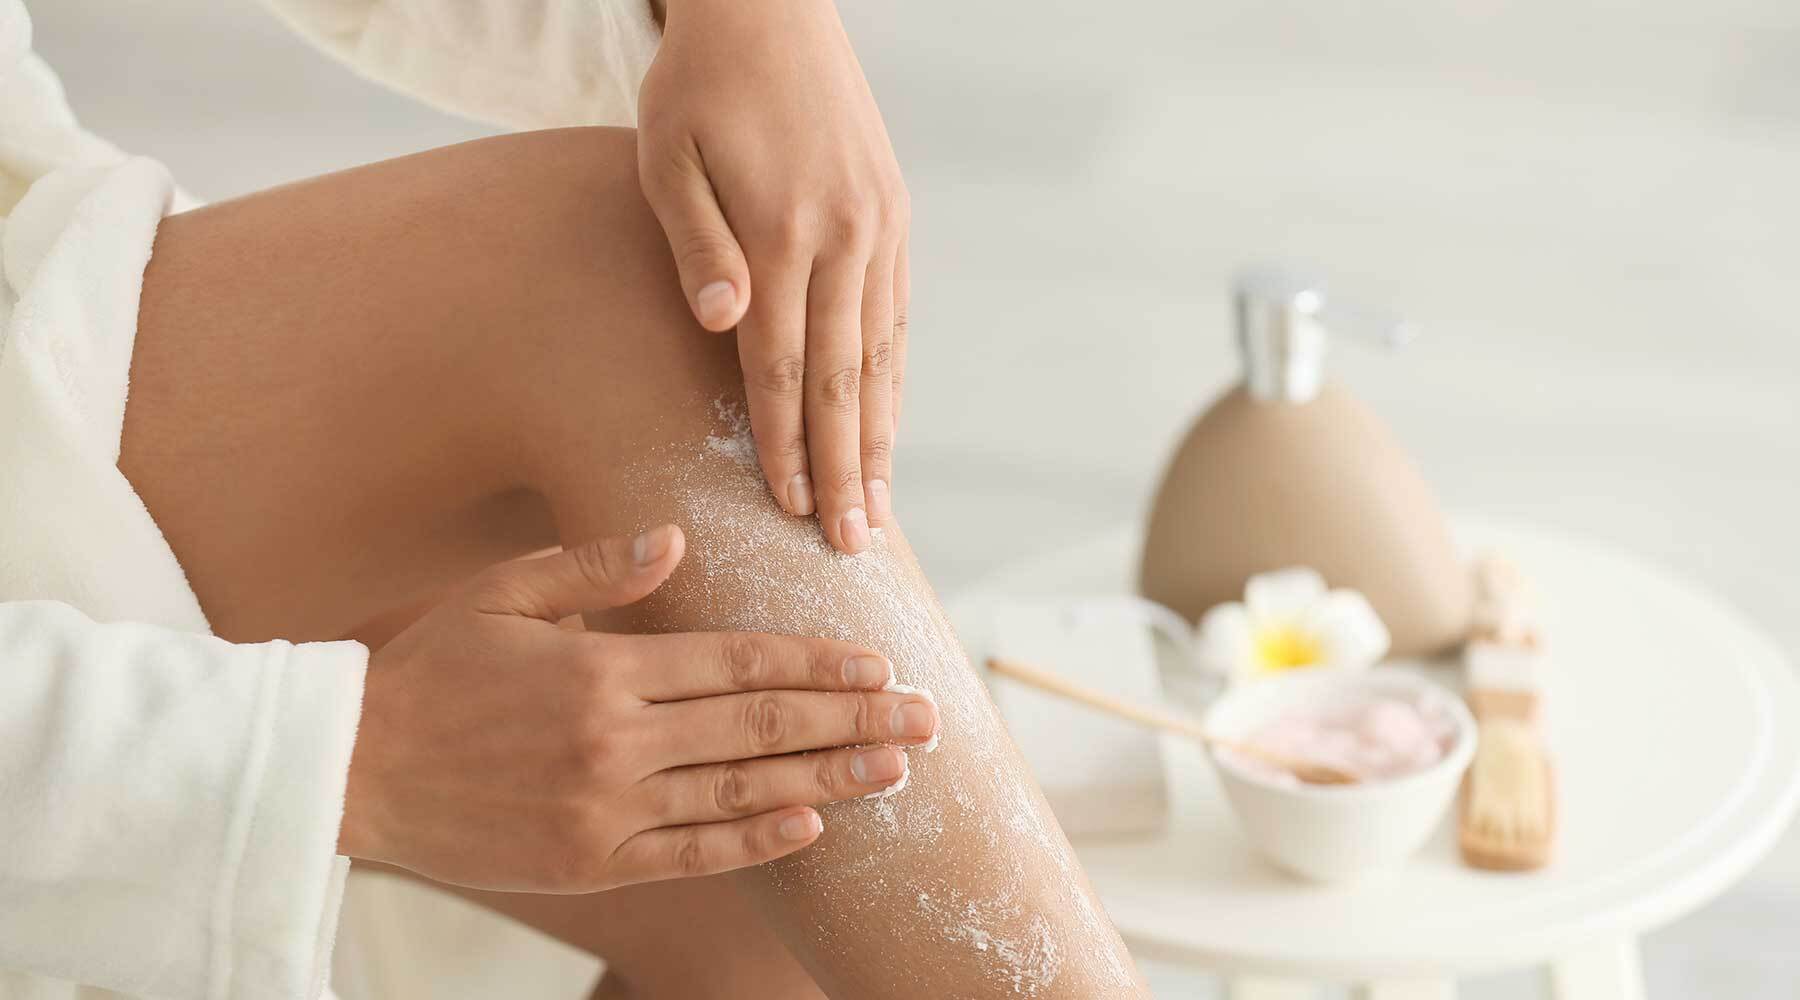 How To Use Body Scrub And Exfoliant Effectively